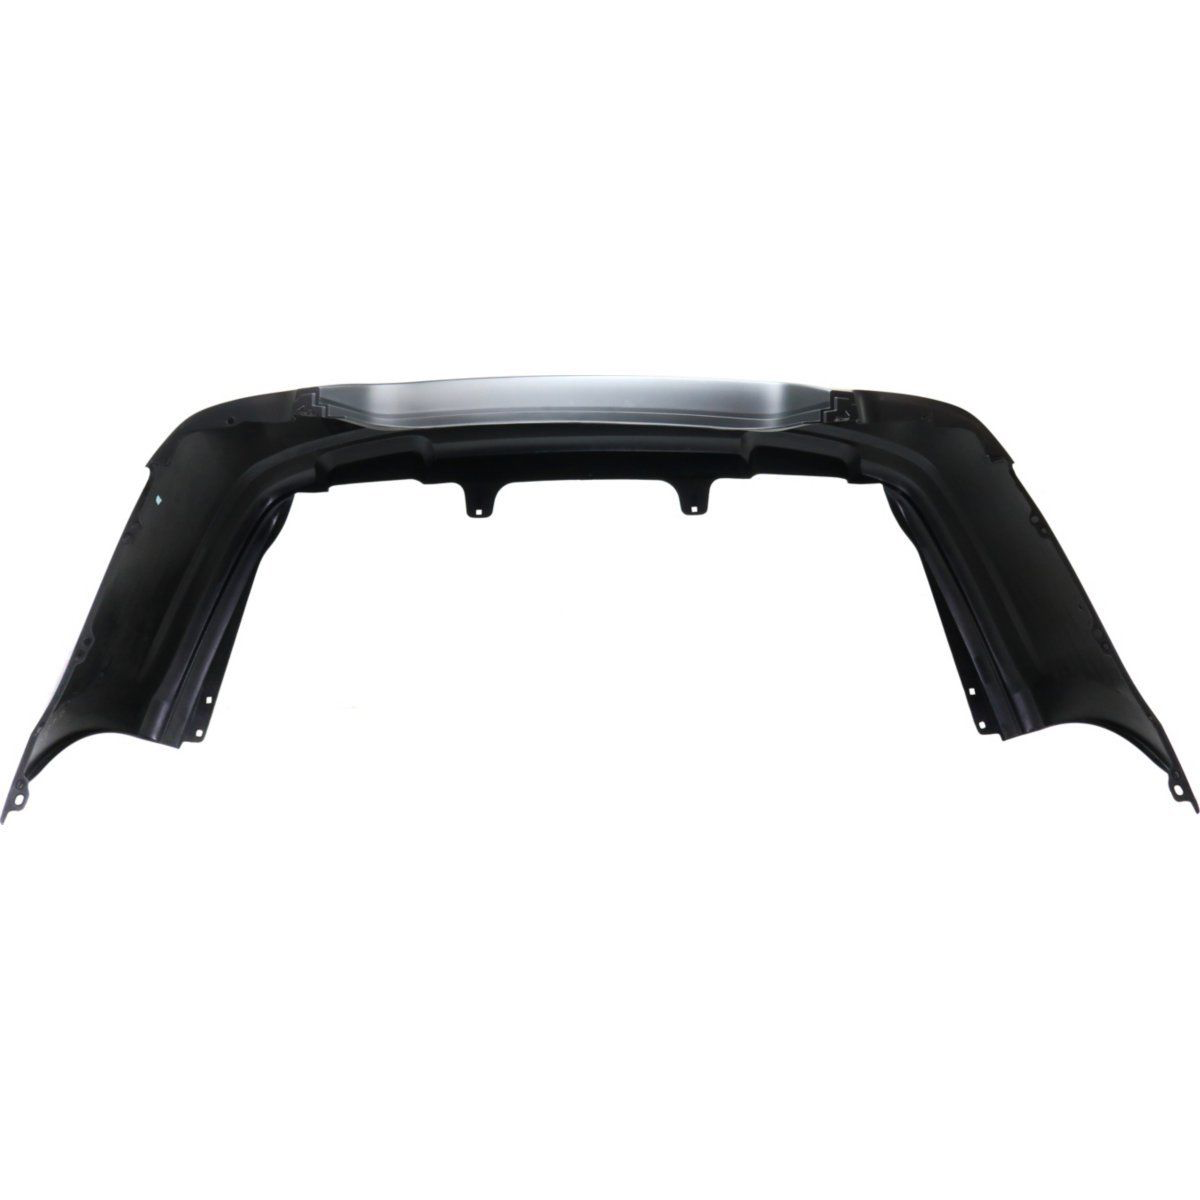 2004-2006 NISSAN MAXIMA Rear Bumper Cover Painted to Match